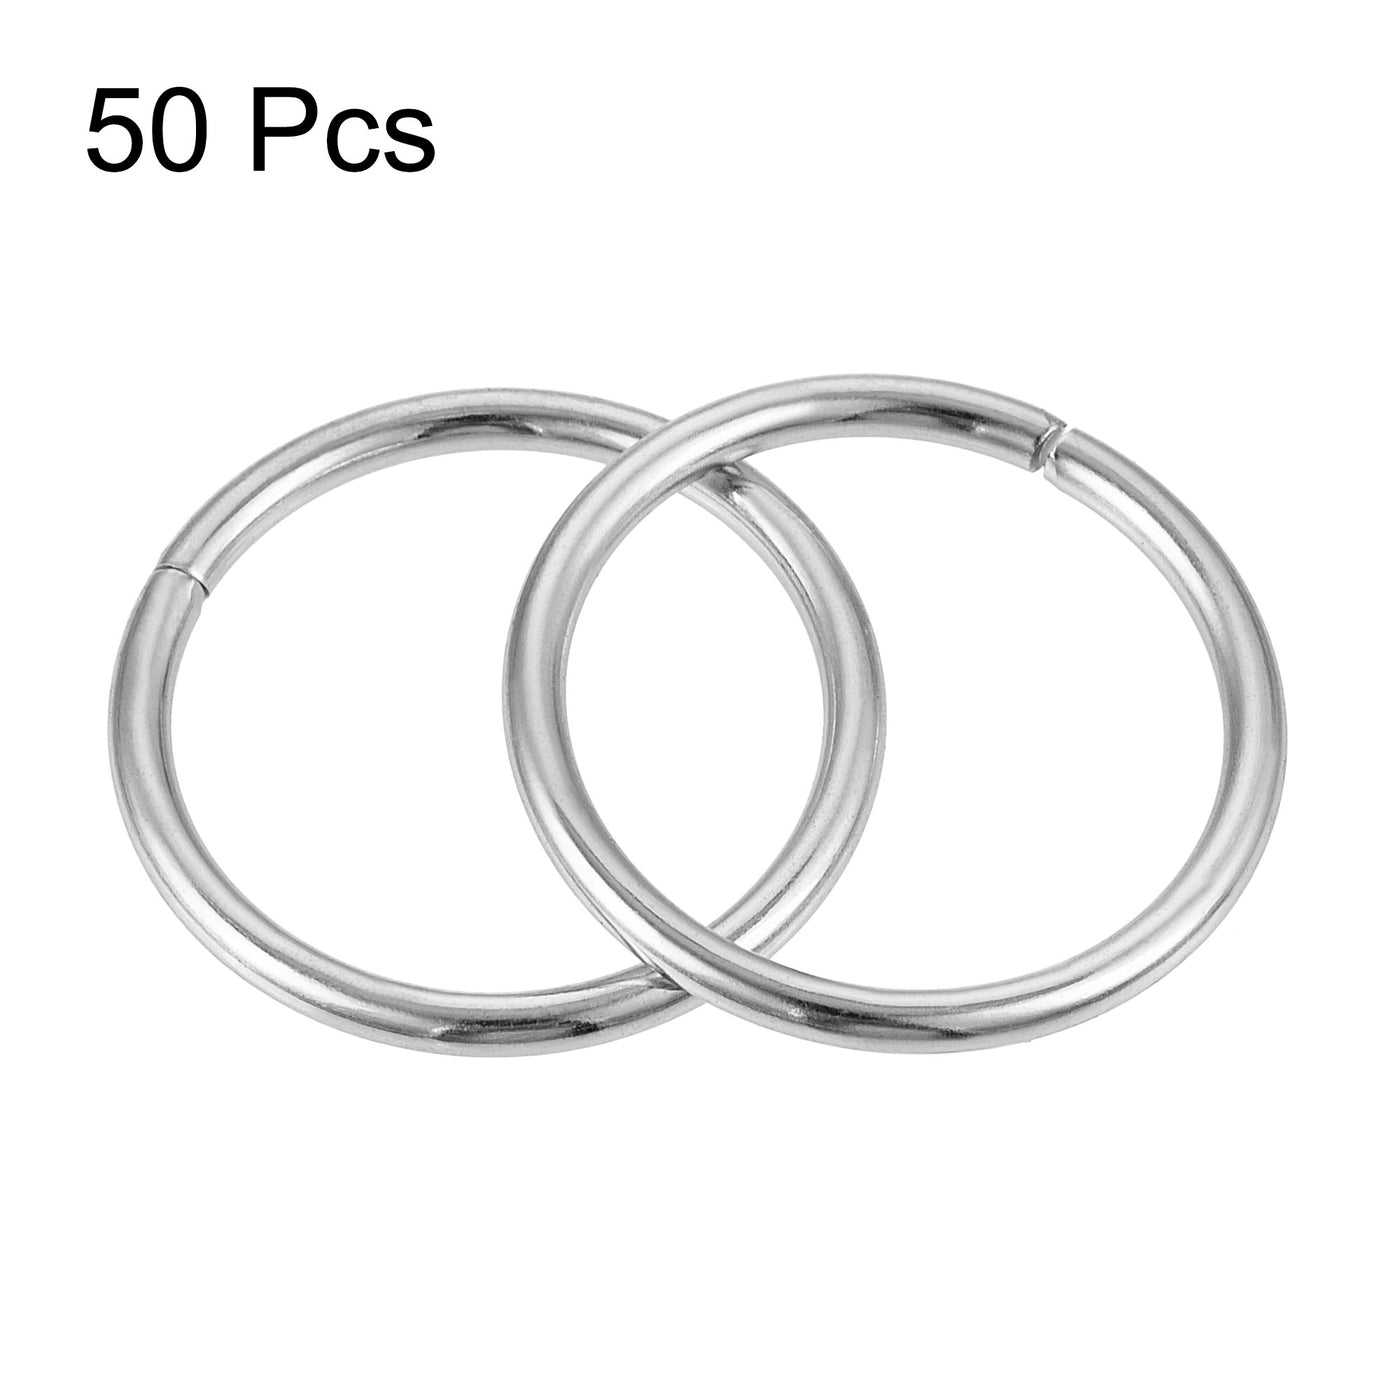 uxcell Uxcell 20mm Metal O Rings Non-Welded for Straps Bags Belts DIY Silver Tone 50pcs